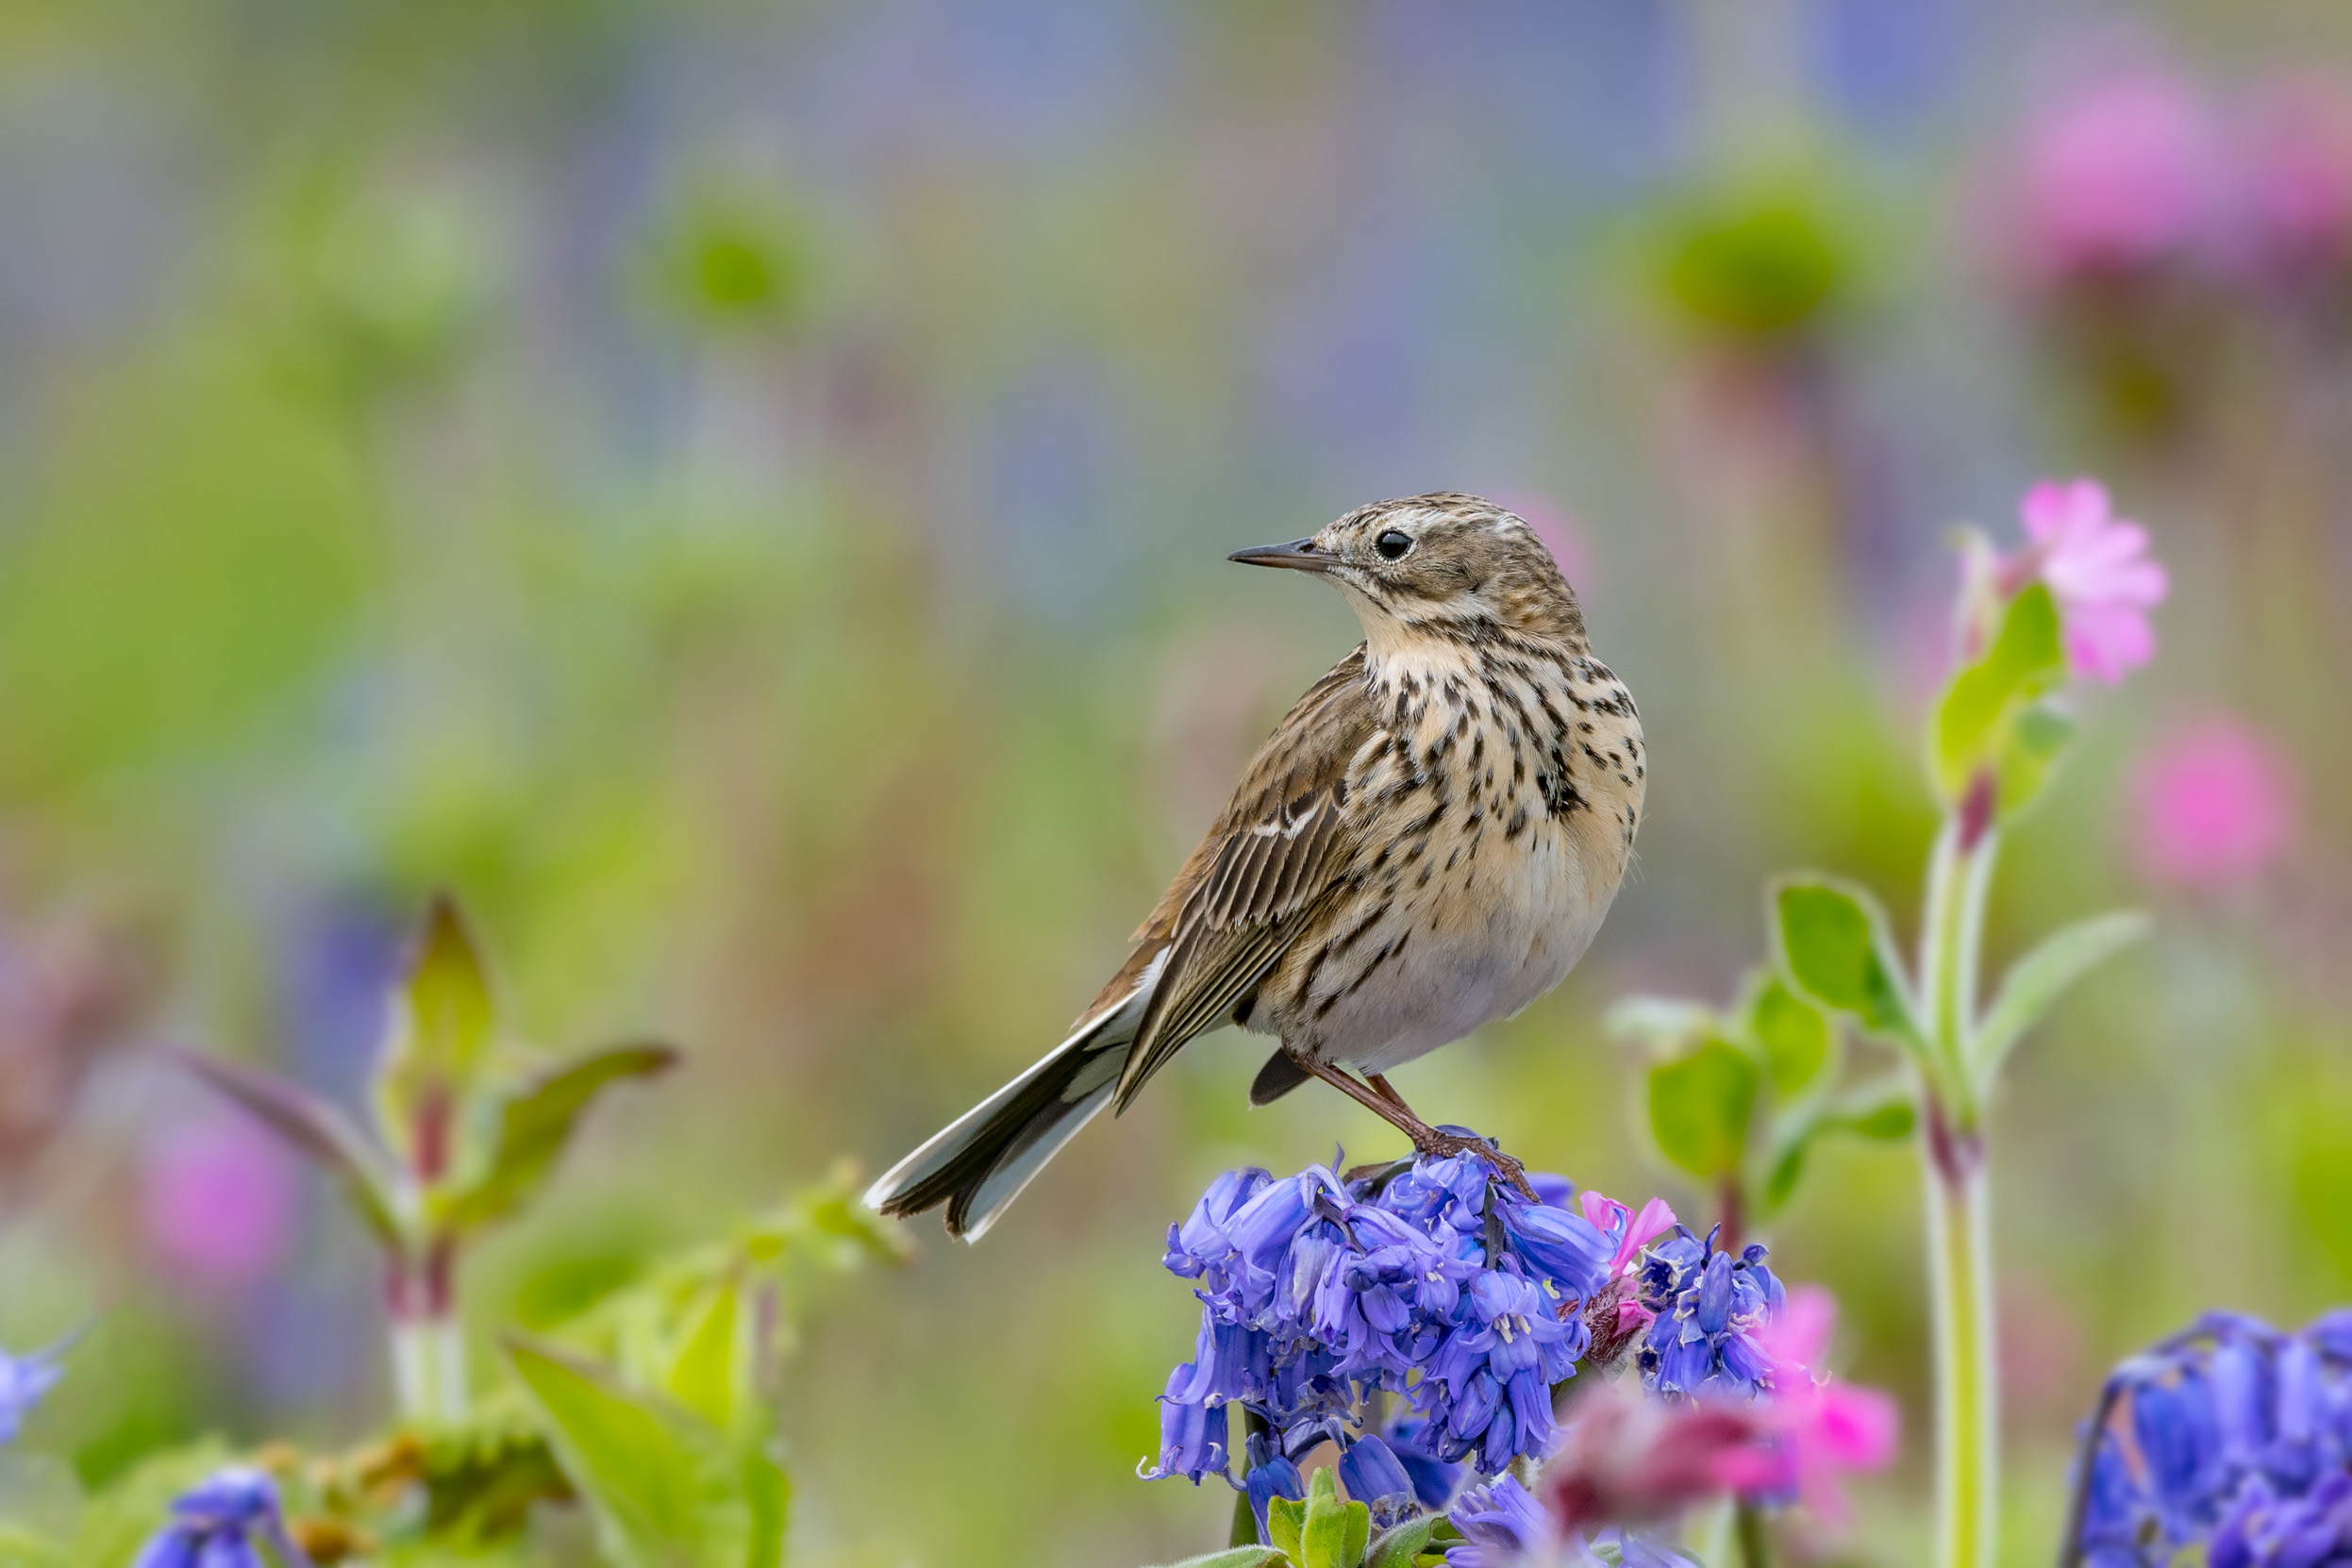 A Meadow Pipit perched upon a bluebell.